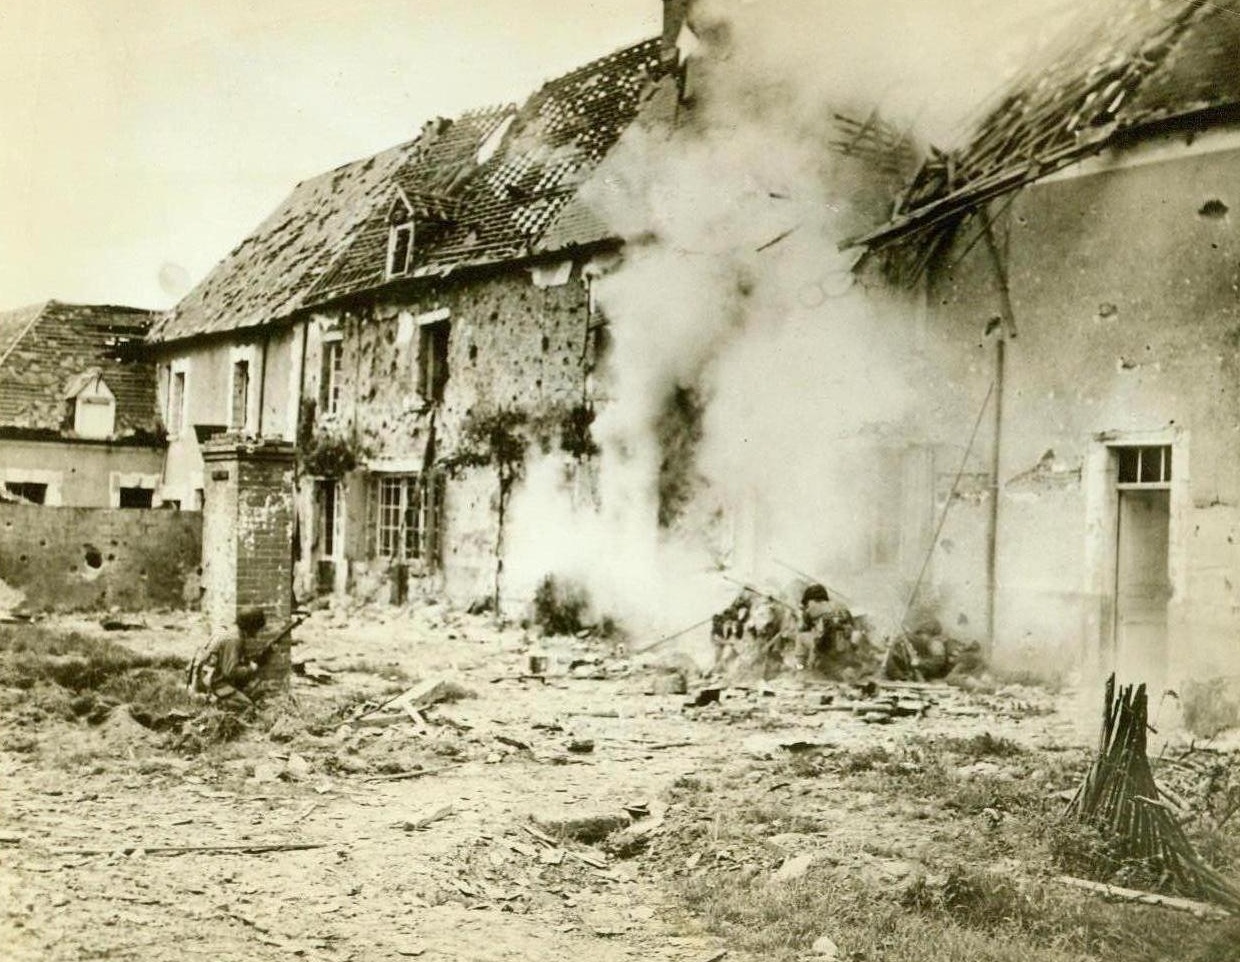 Doom For Snipers, 7/24/1944. Saintenay, France - Taking cover behind a brick pillar and a pile of rubble, American infantrymen send bullets whizzing into a snipers nest in Saintenay. Their prey hides in the bomb-ruined houses in background. Credit: ACME;